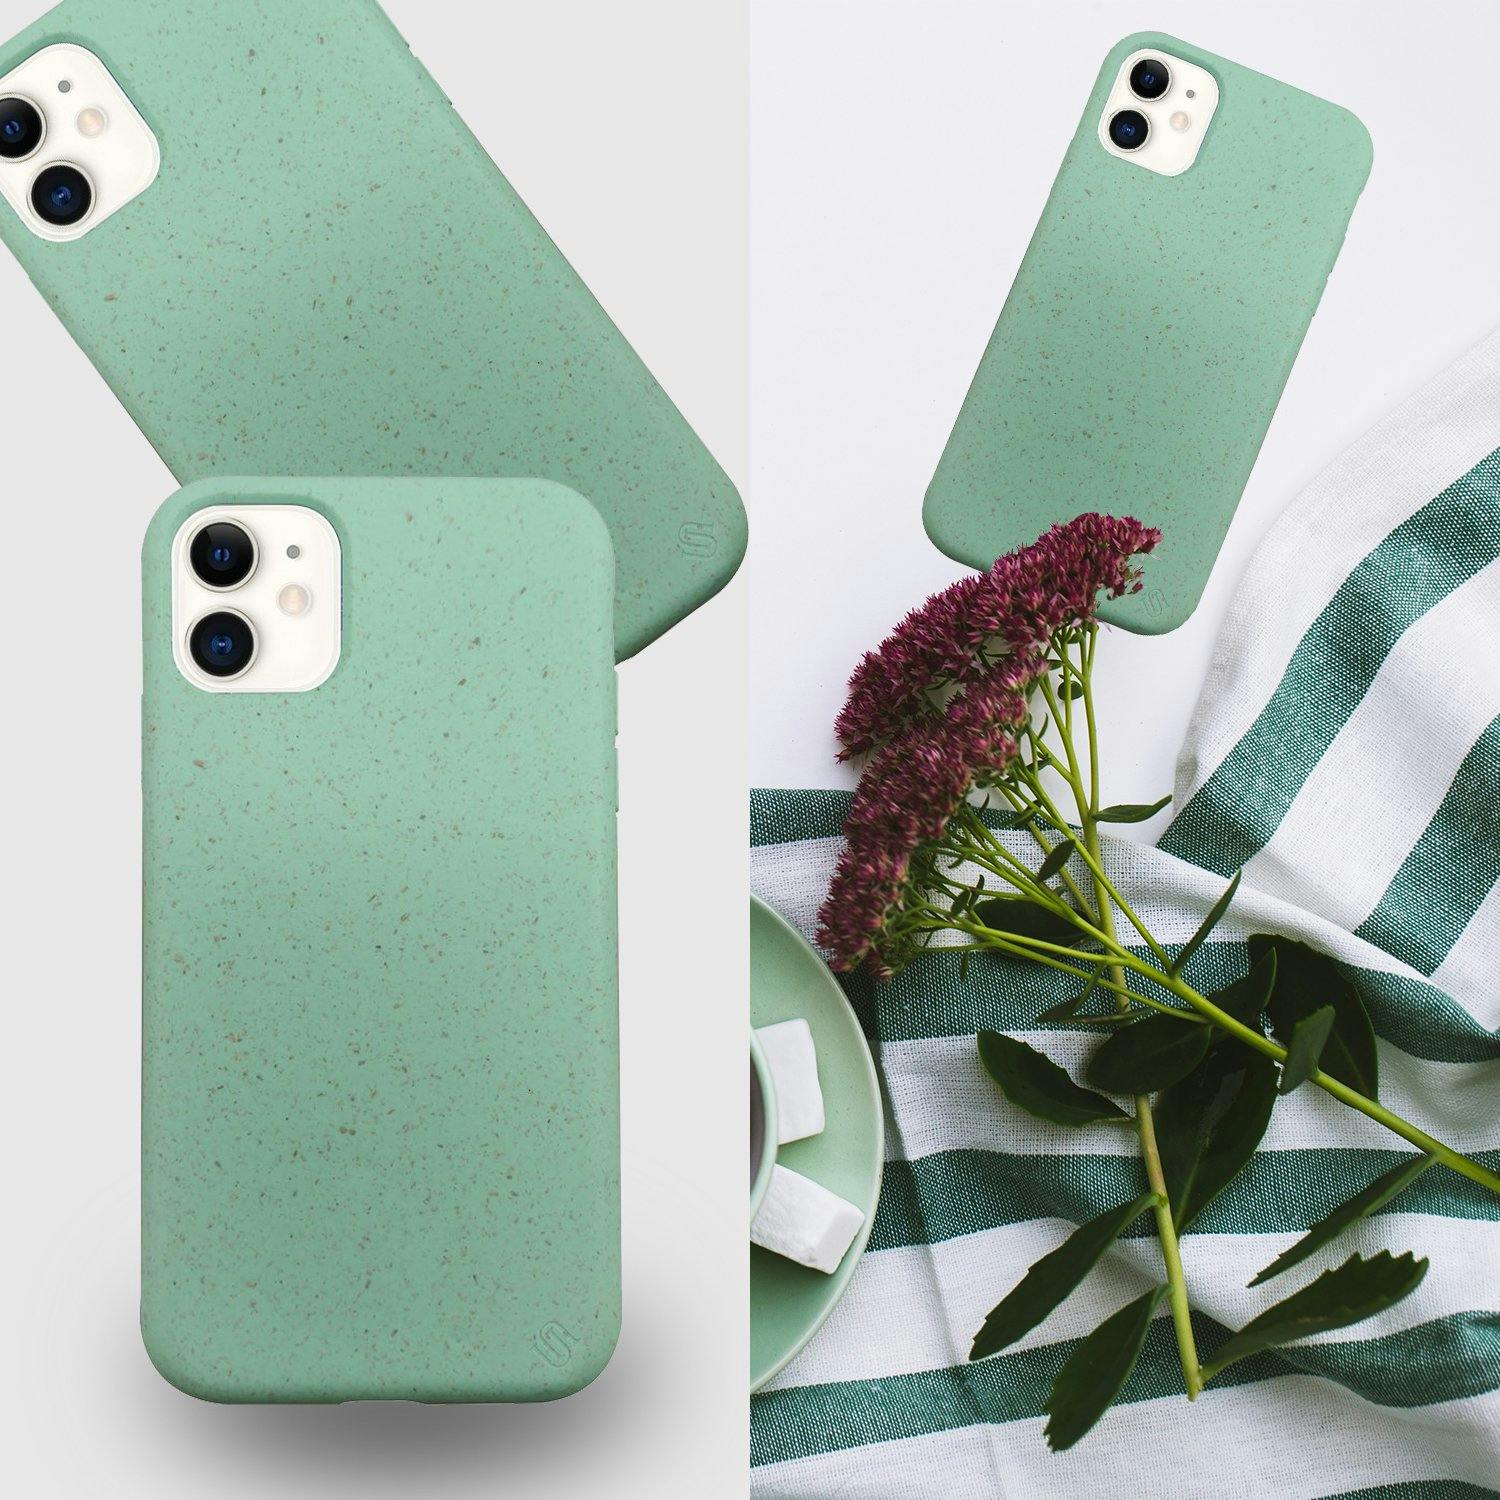 Home Electronics Phone Cases Eco Friendly Mint Green Iphone 11 Case